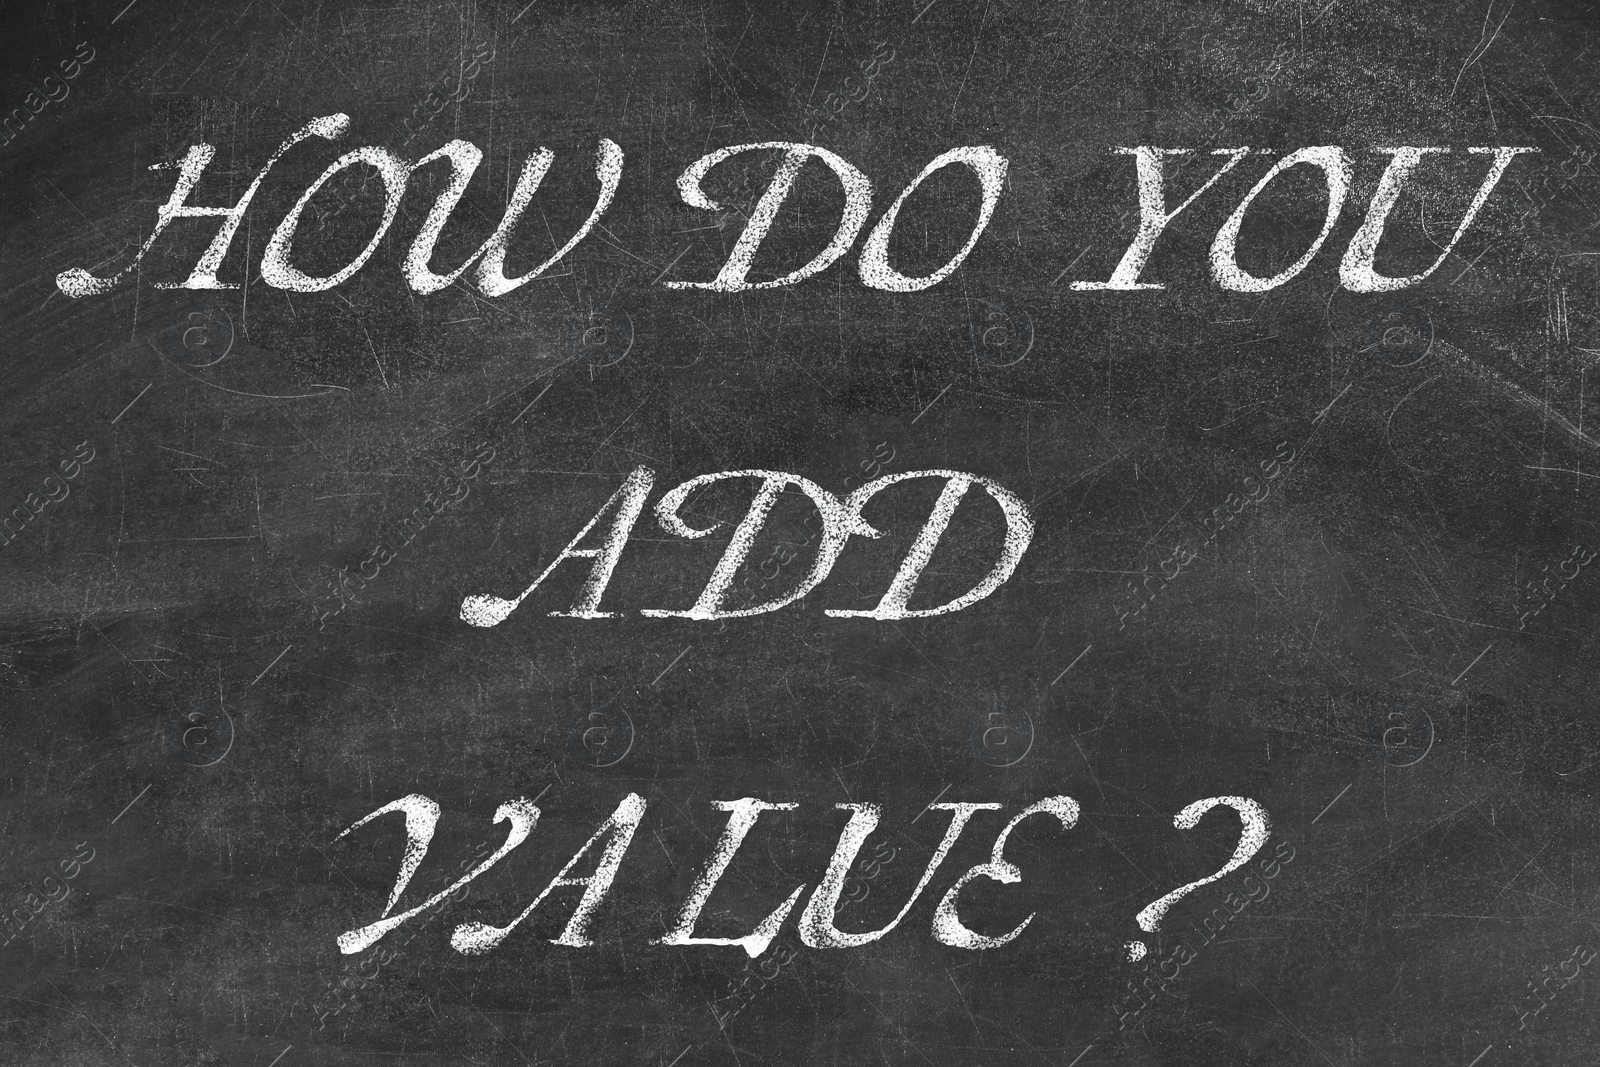 Image of Question HOW DO YOU ADD VALUE written on blackboard